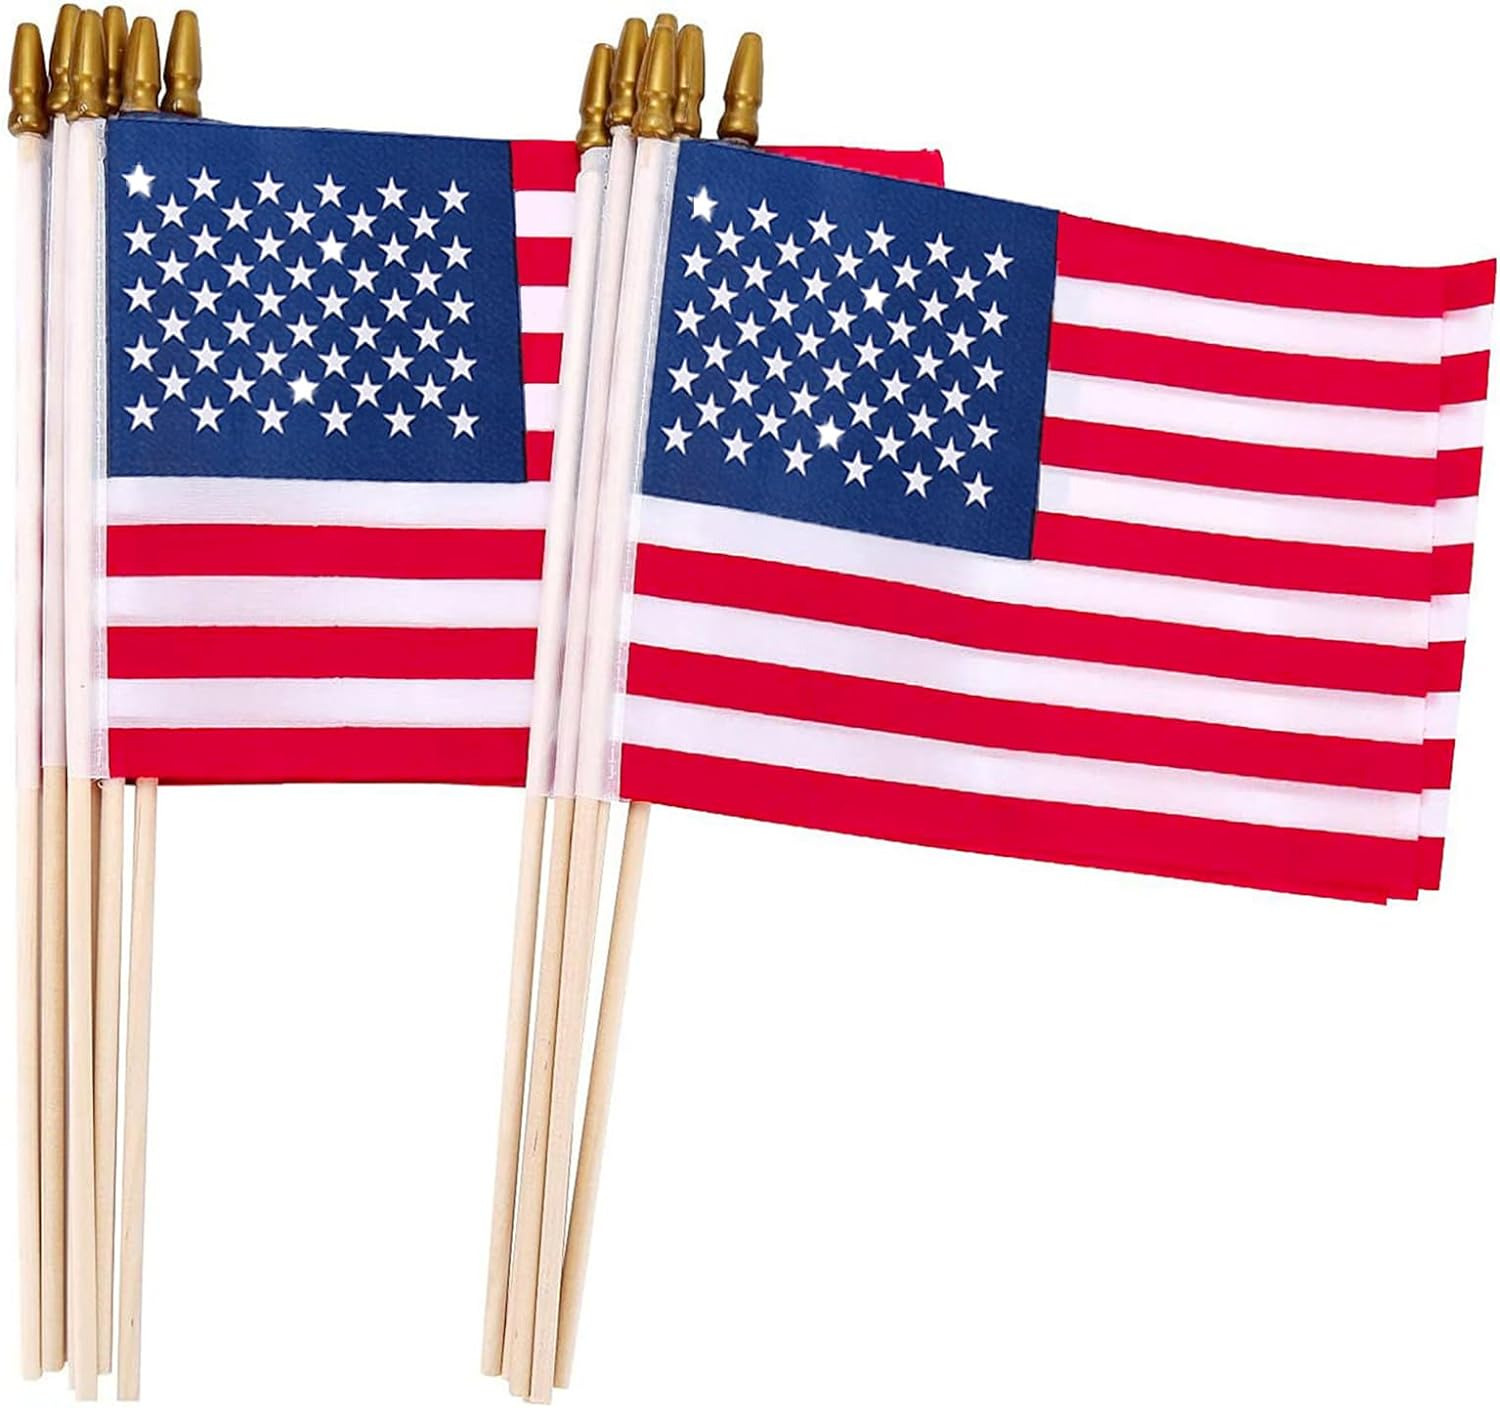 12 Pcs Small American Flags on Sticks, 8 X 12 Inches Mini Handheld US Flags Stic